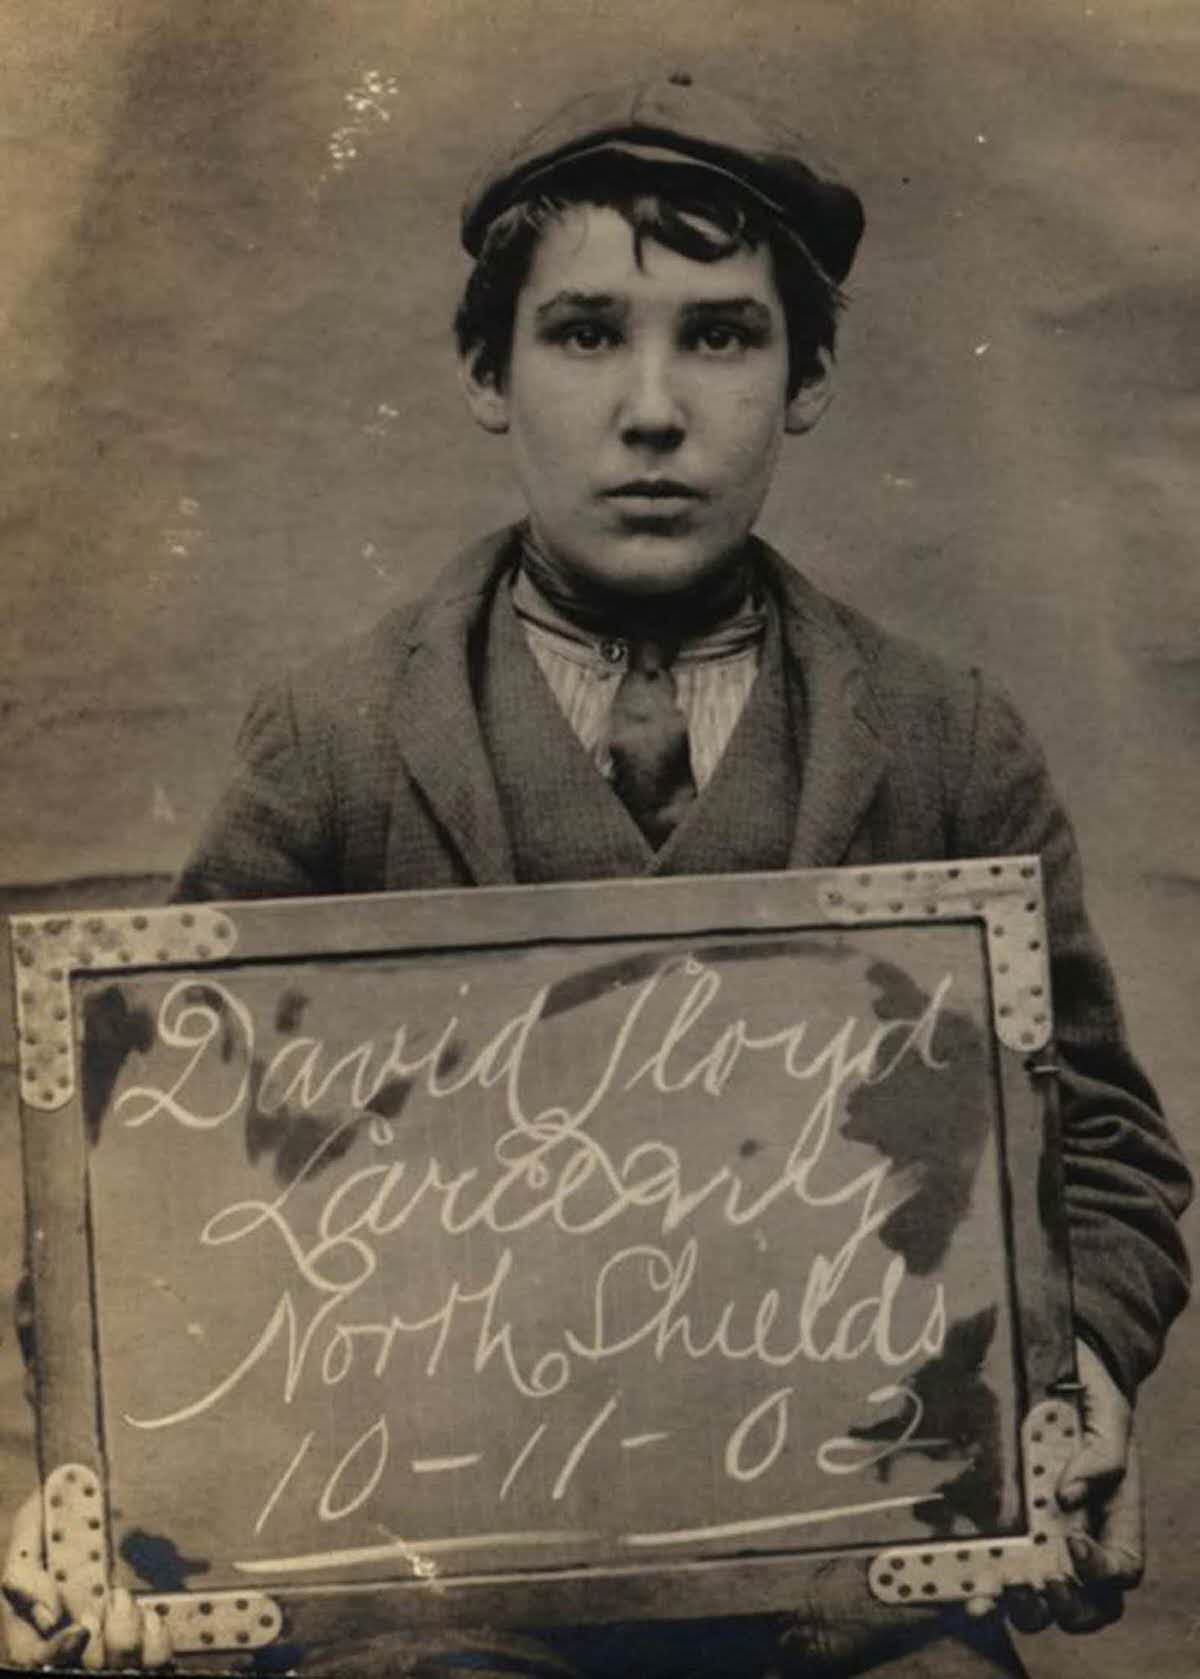 David Lloyd, 15, arrested for stealing brushes and a box, 1902.